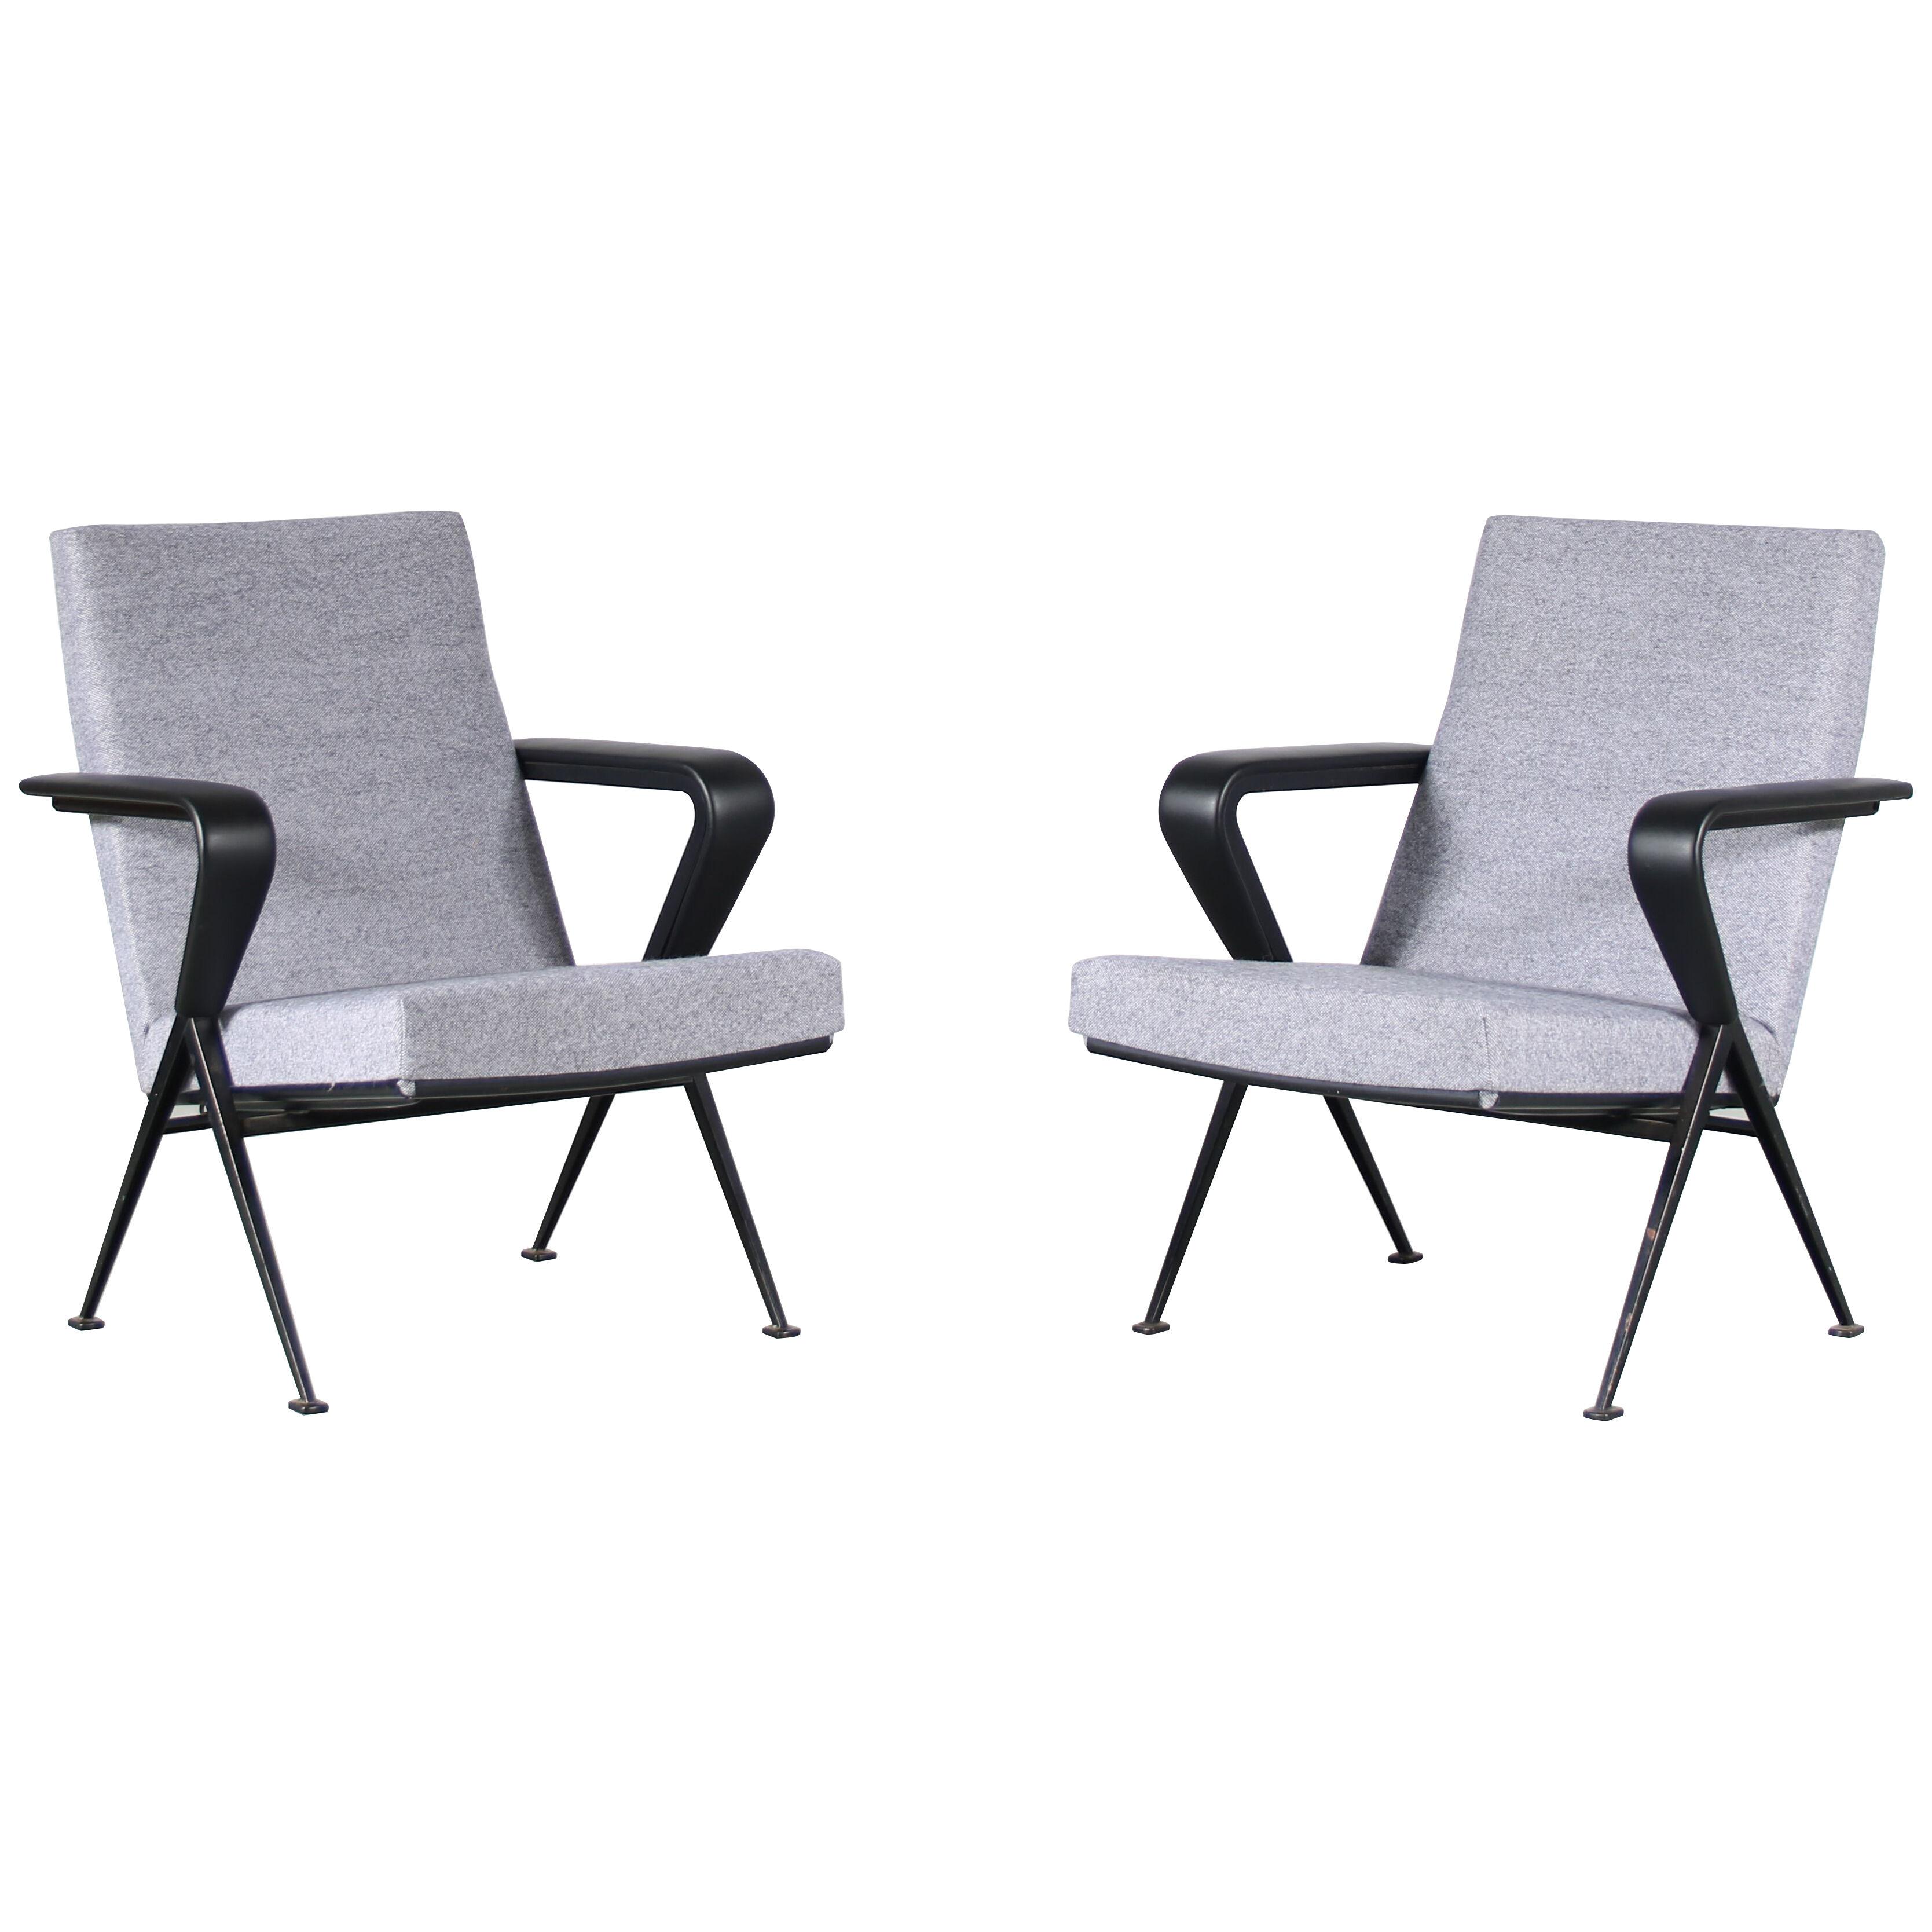 1960s Pair of “Repose” Chairs by Friso Kramer for Ahrend de Cirkel, Netherlands